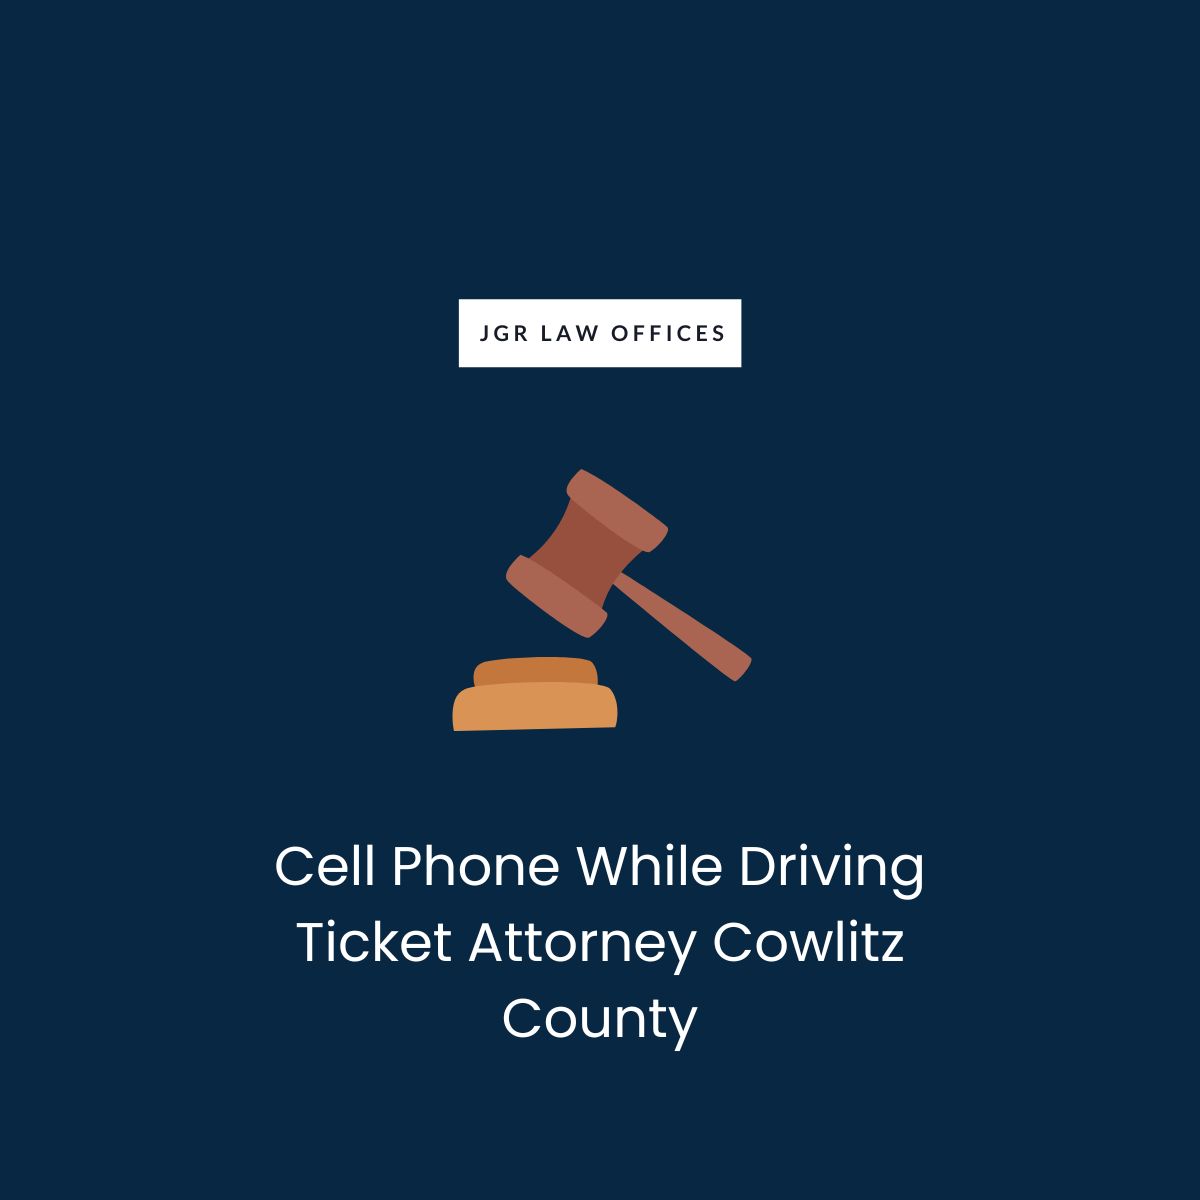 Cell Phone While Driving Ticket Attorney Cowlitz County